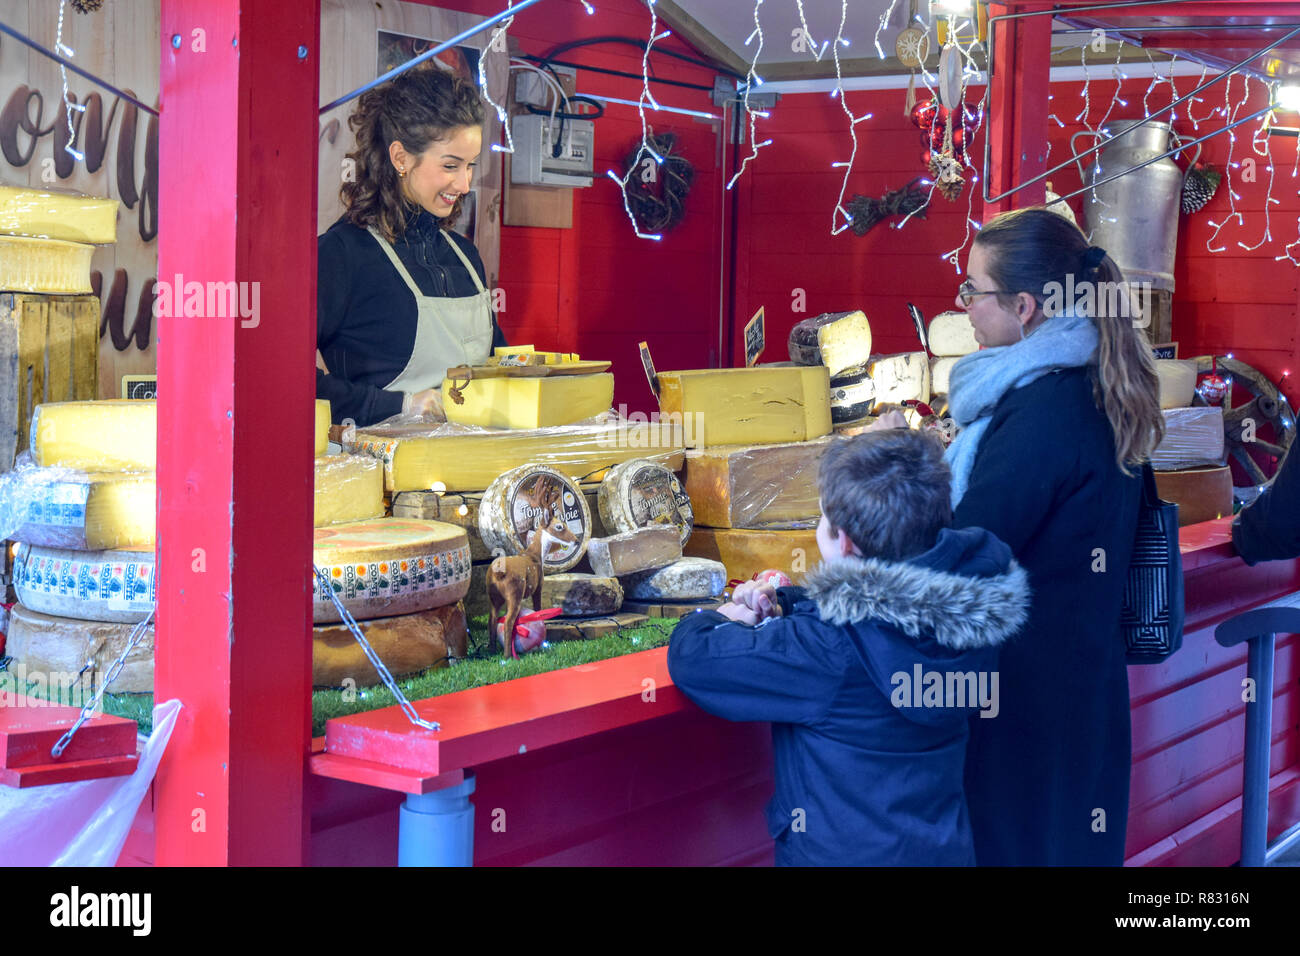 A pretty cheese seller at the Christmas market in Rennes, France waits on a mother and her son. Stock Photo